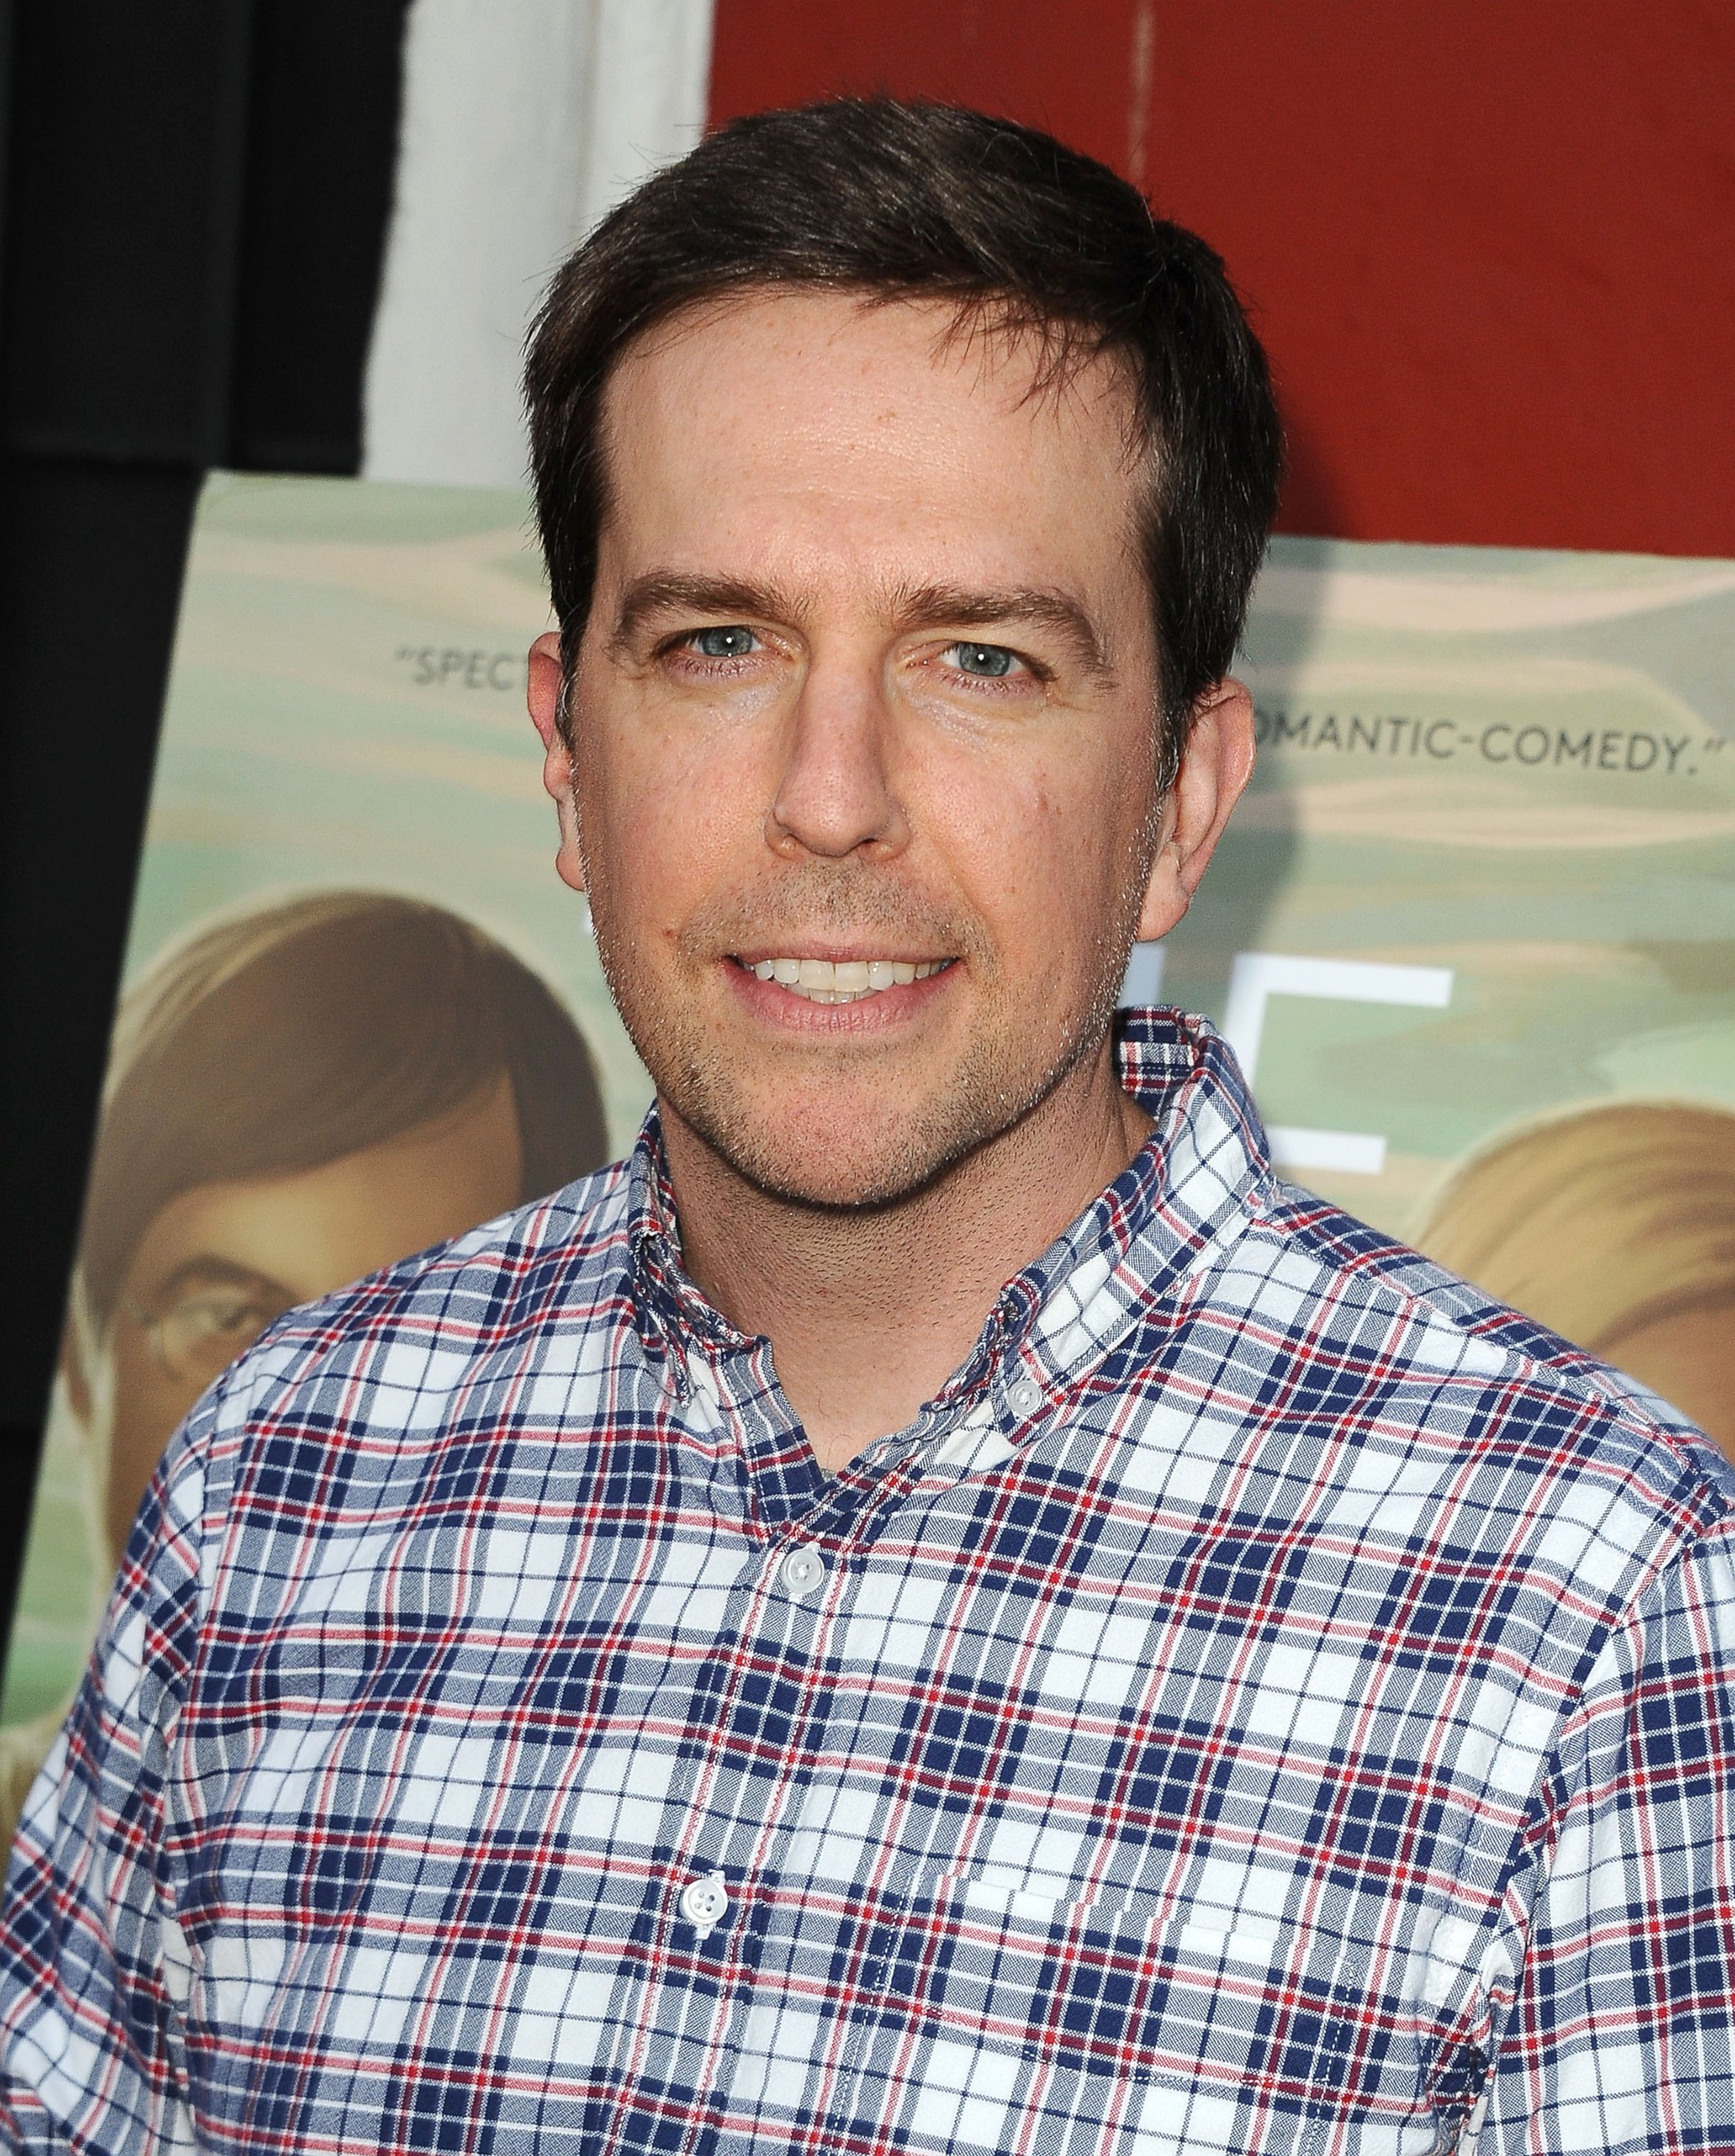 PHOTO: Ed Helms attends the premiere of "The One I Love" at the Vista Theatre on Aug. 7, 2014 in Los Angeles, Calif.